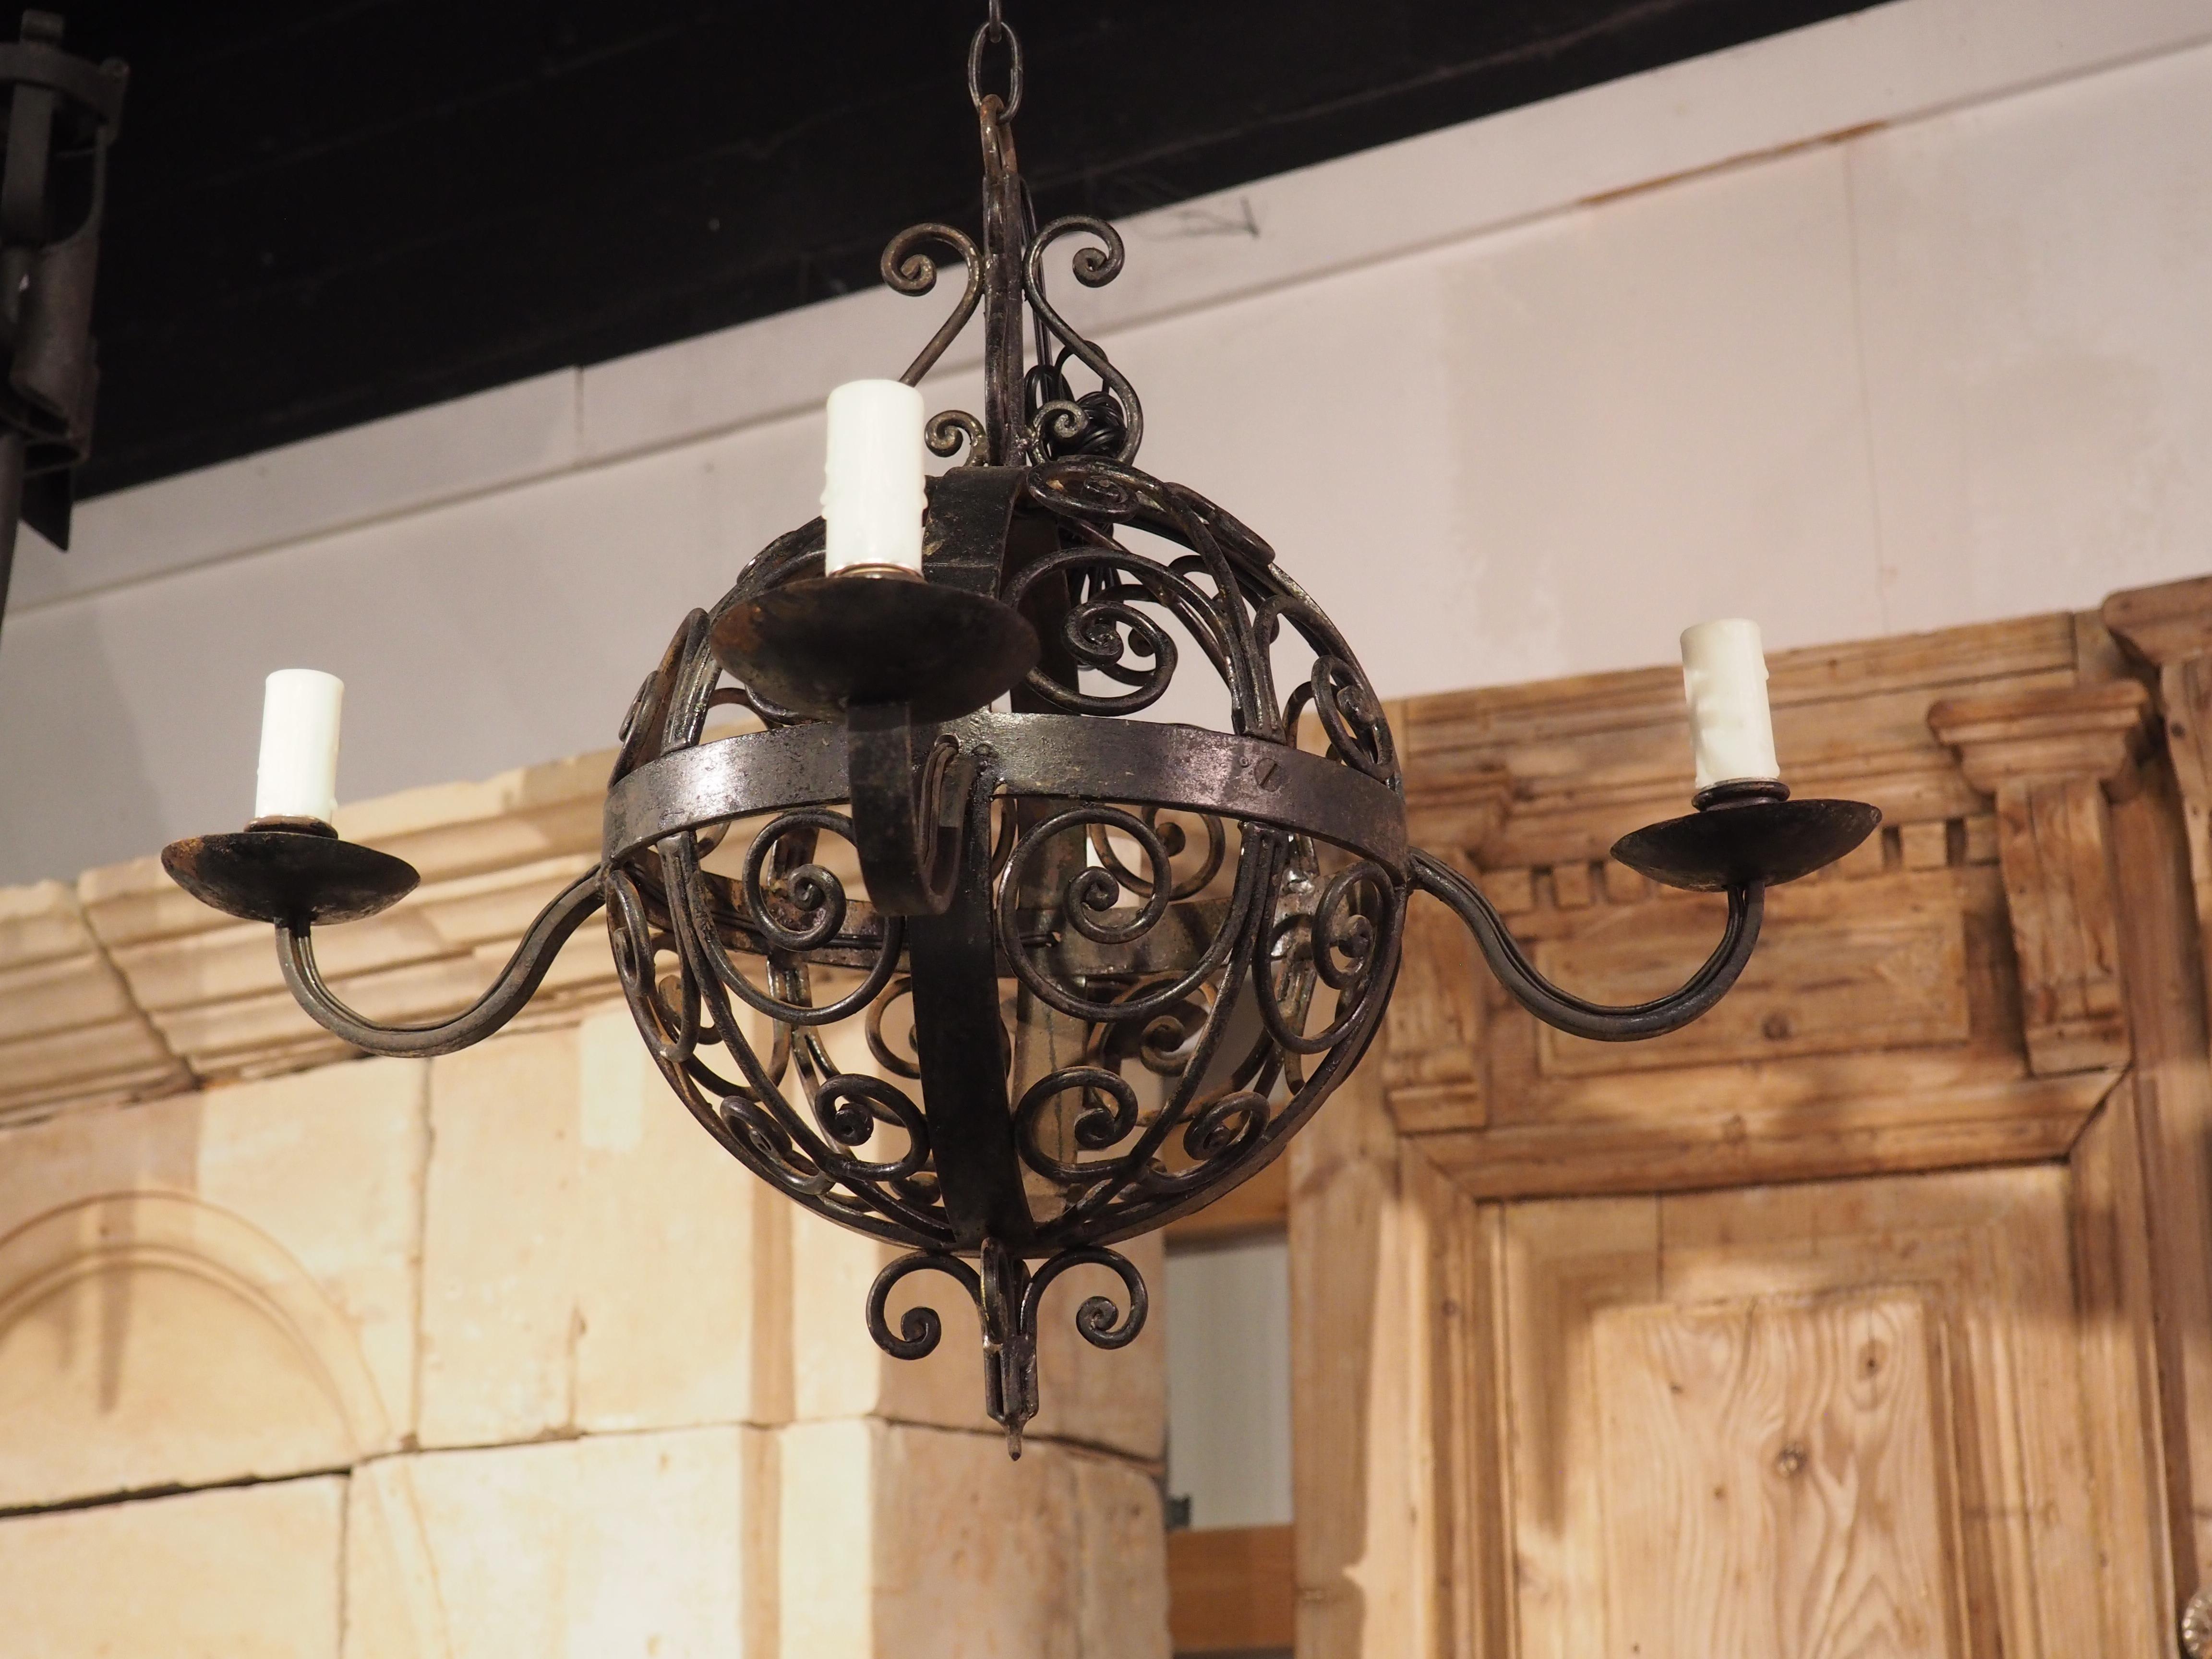 Crafted in France during the 1920’s, this wrought iron ball chandelier features four saucer sconces on top of S-scroll arms. Each of the arms is affixed to a band that circumnavigates the open sphere laden with scrollwork. The highly worked sphere